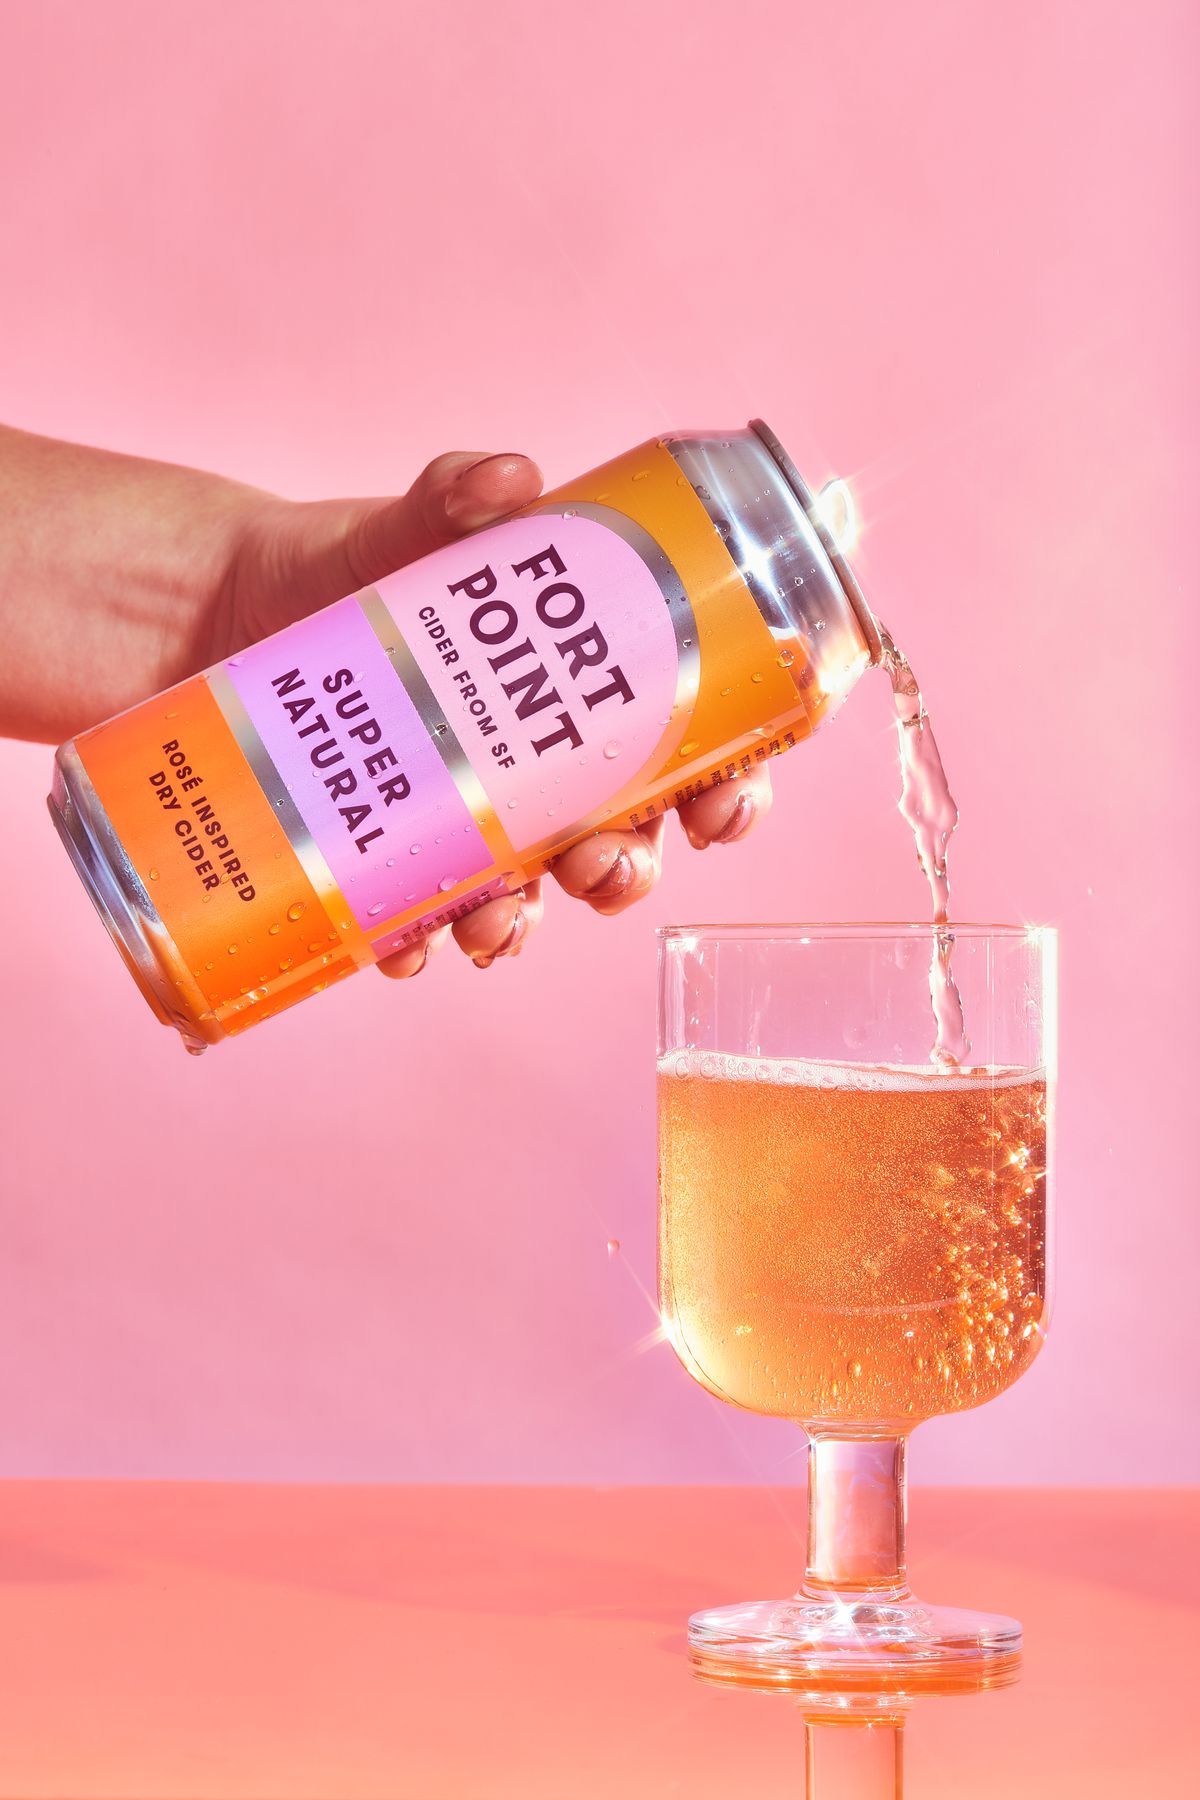 A can of pink-colored beverage being poured into a glass.